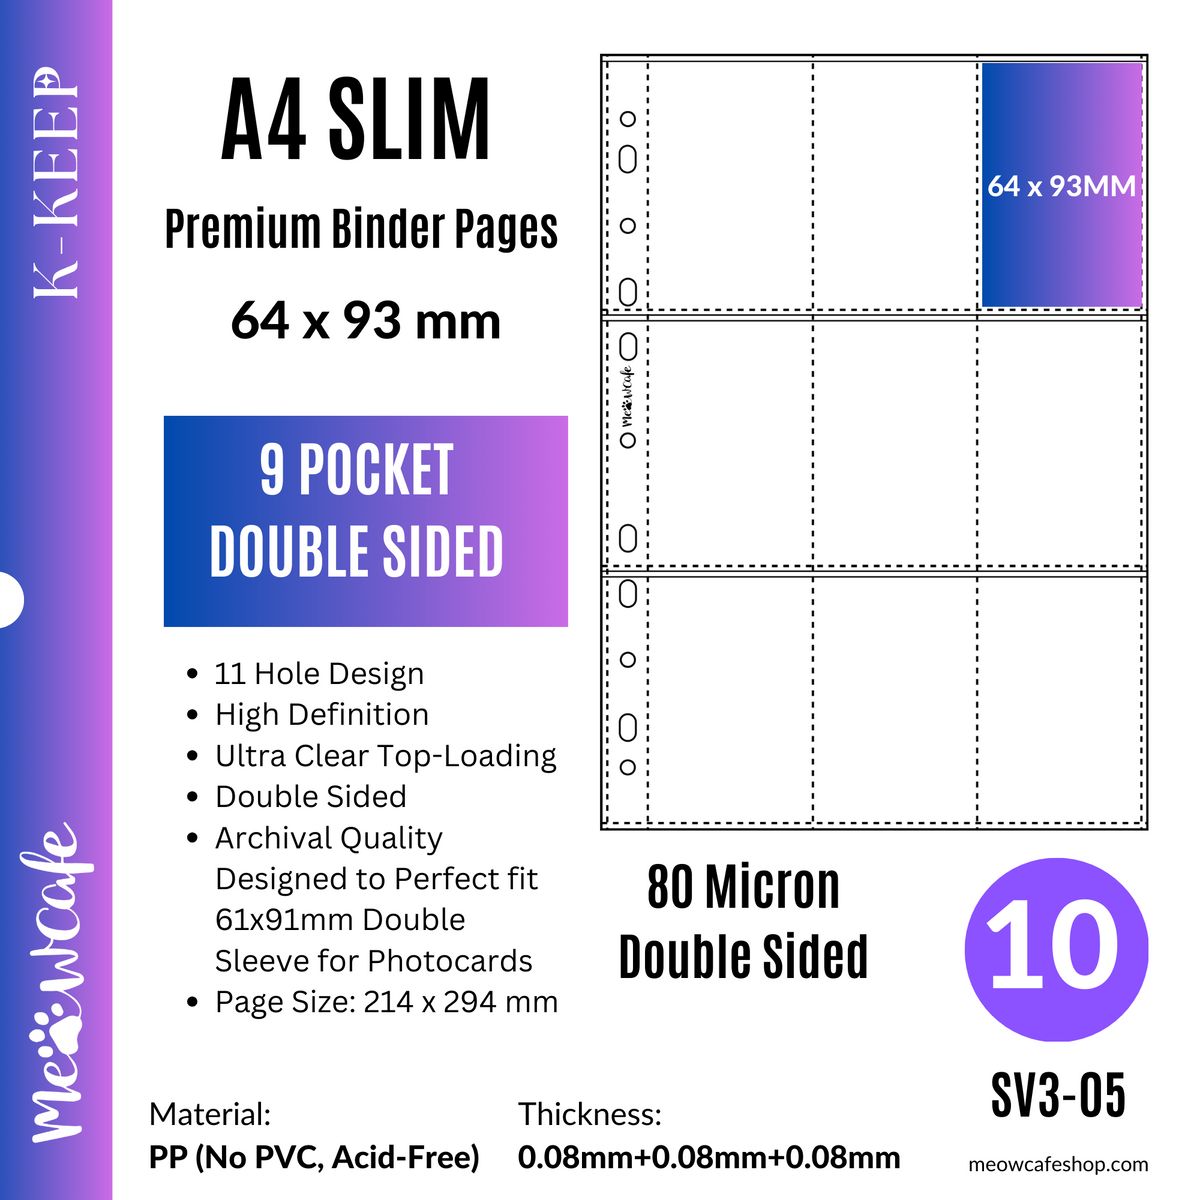 (Coming on March 30) K-KEEP [A4 Slim] - 9 Pocket Slim Double Sided (64x93mm)- 11 Holes Premium Binder Pages, 100 Micron Thick, High Definition (Pack of 10) - (SV3-05)